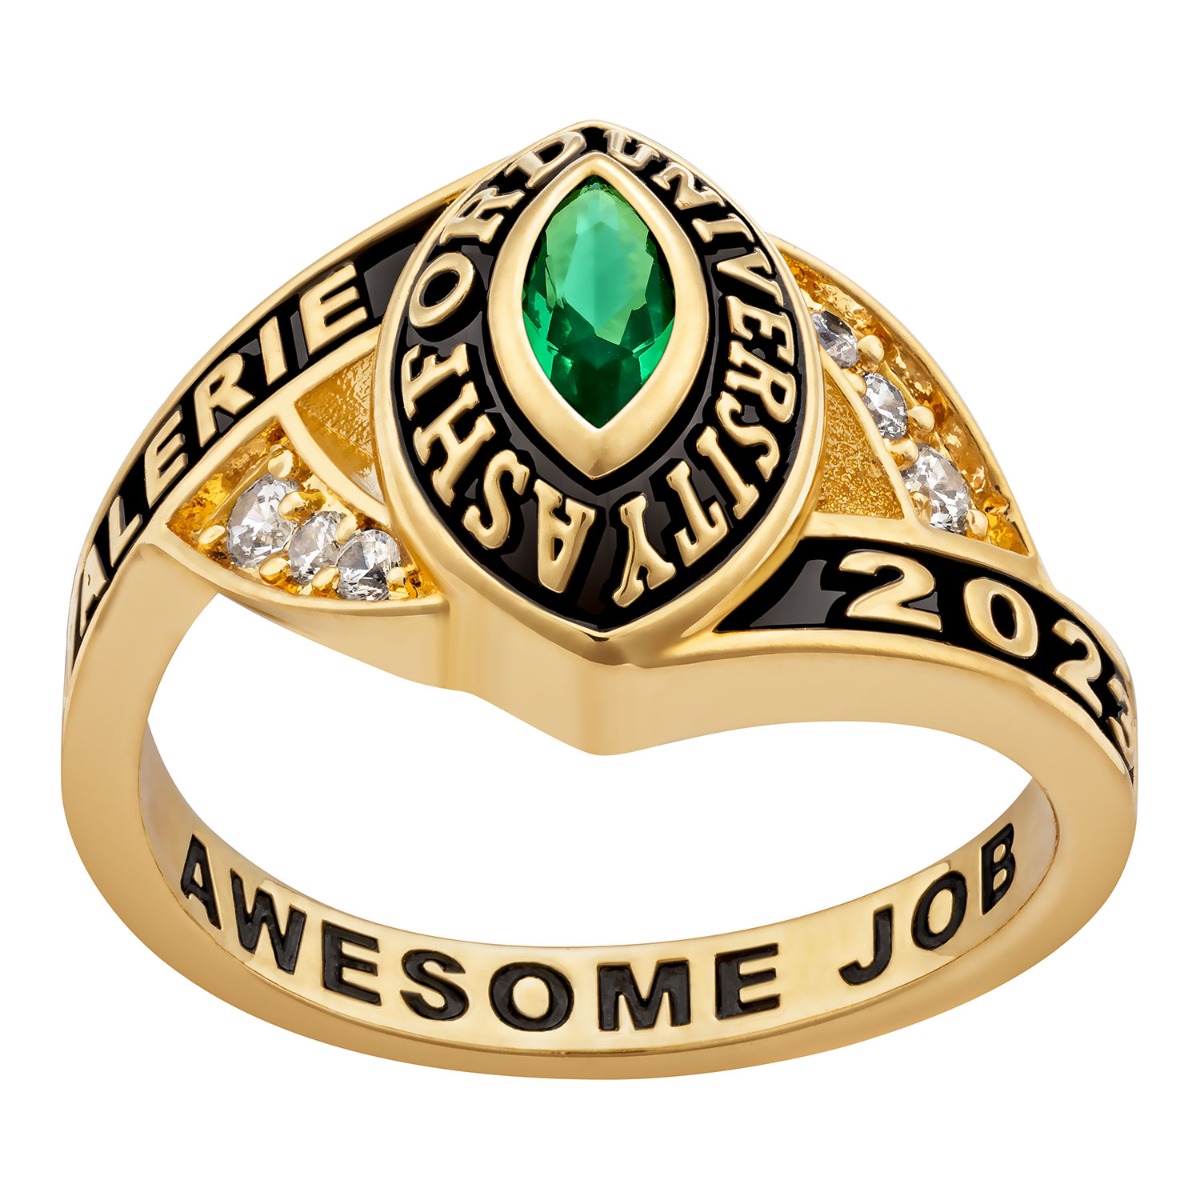 Ladies' Class Ring in Gold Over Celebrium Marquise Birthstone 